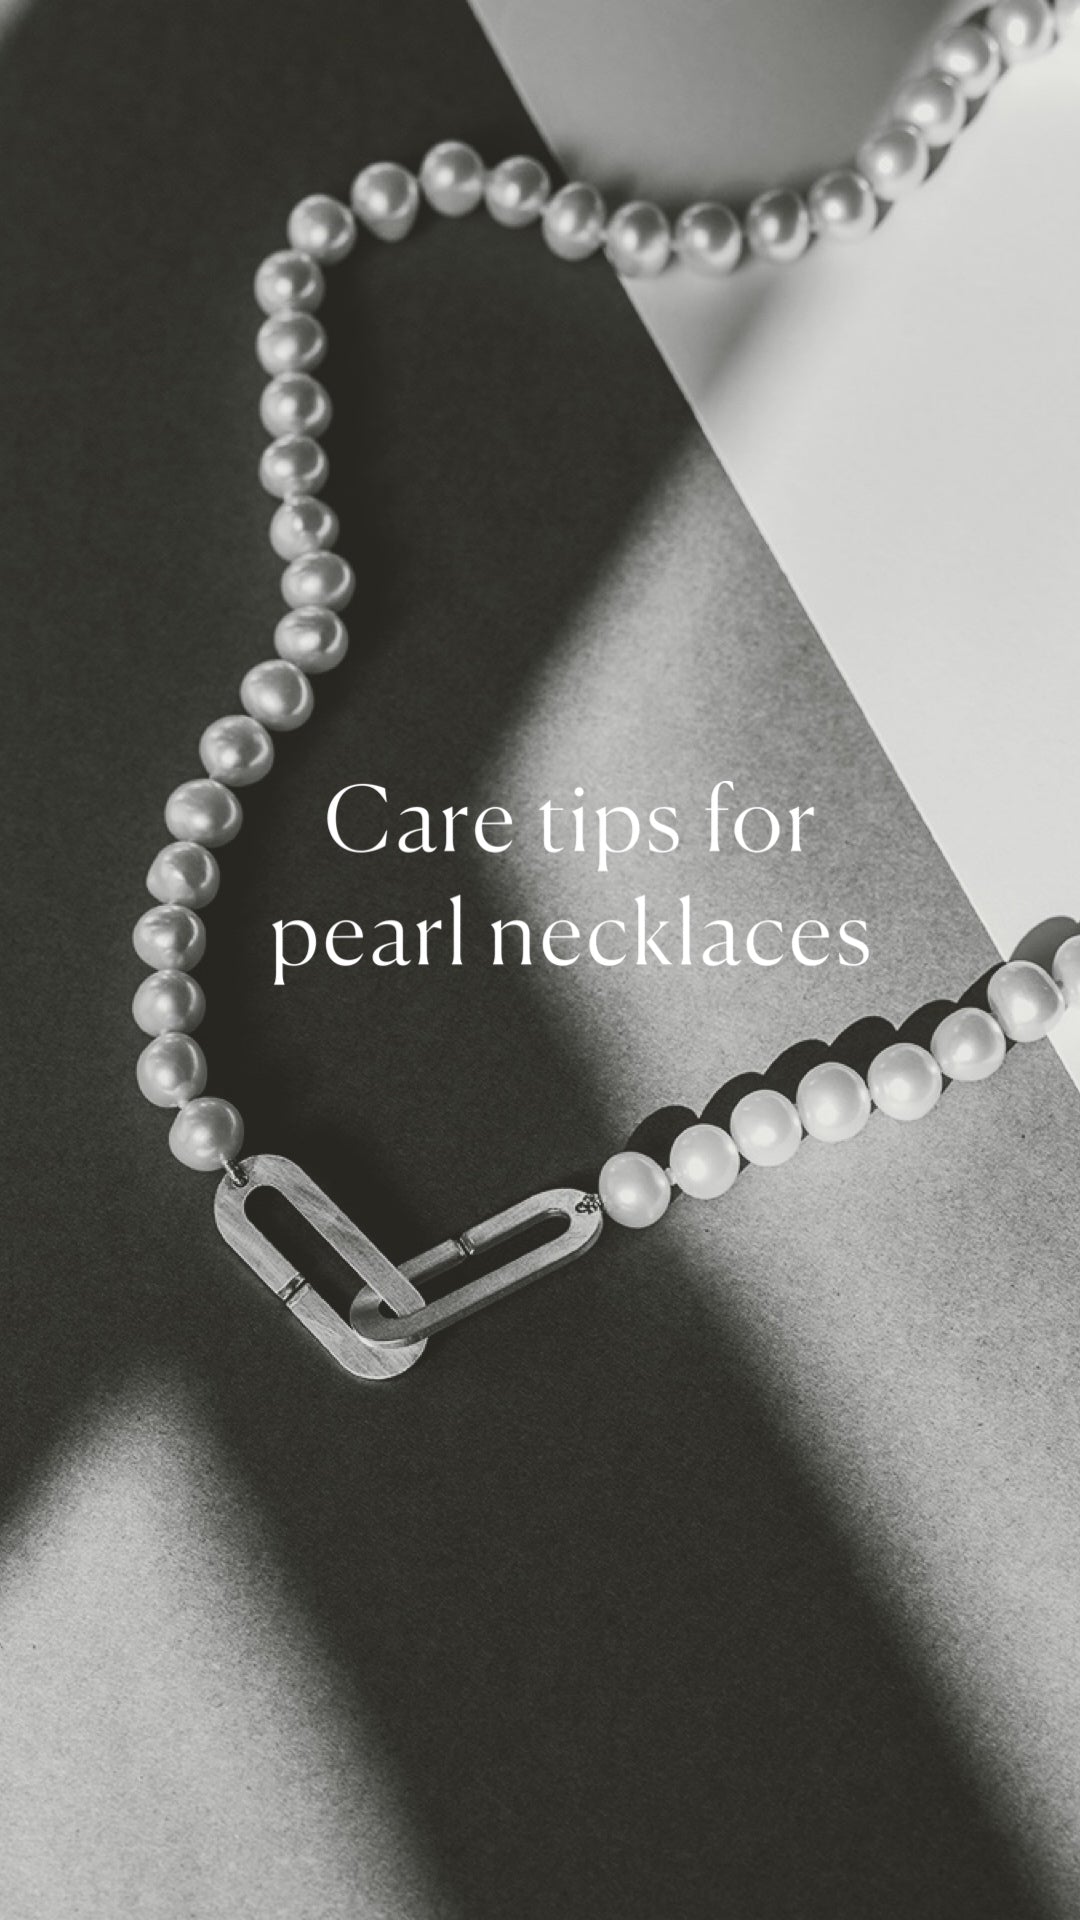 How to Care for your Pearl Necklaces